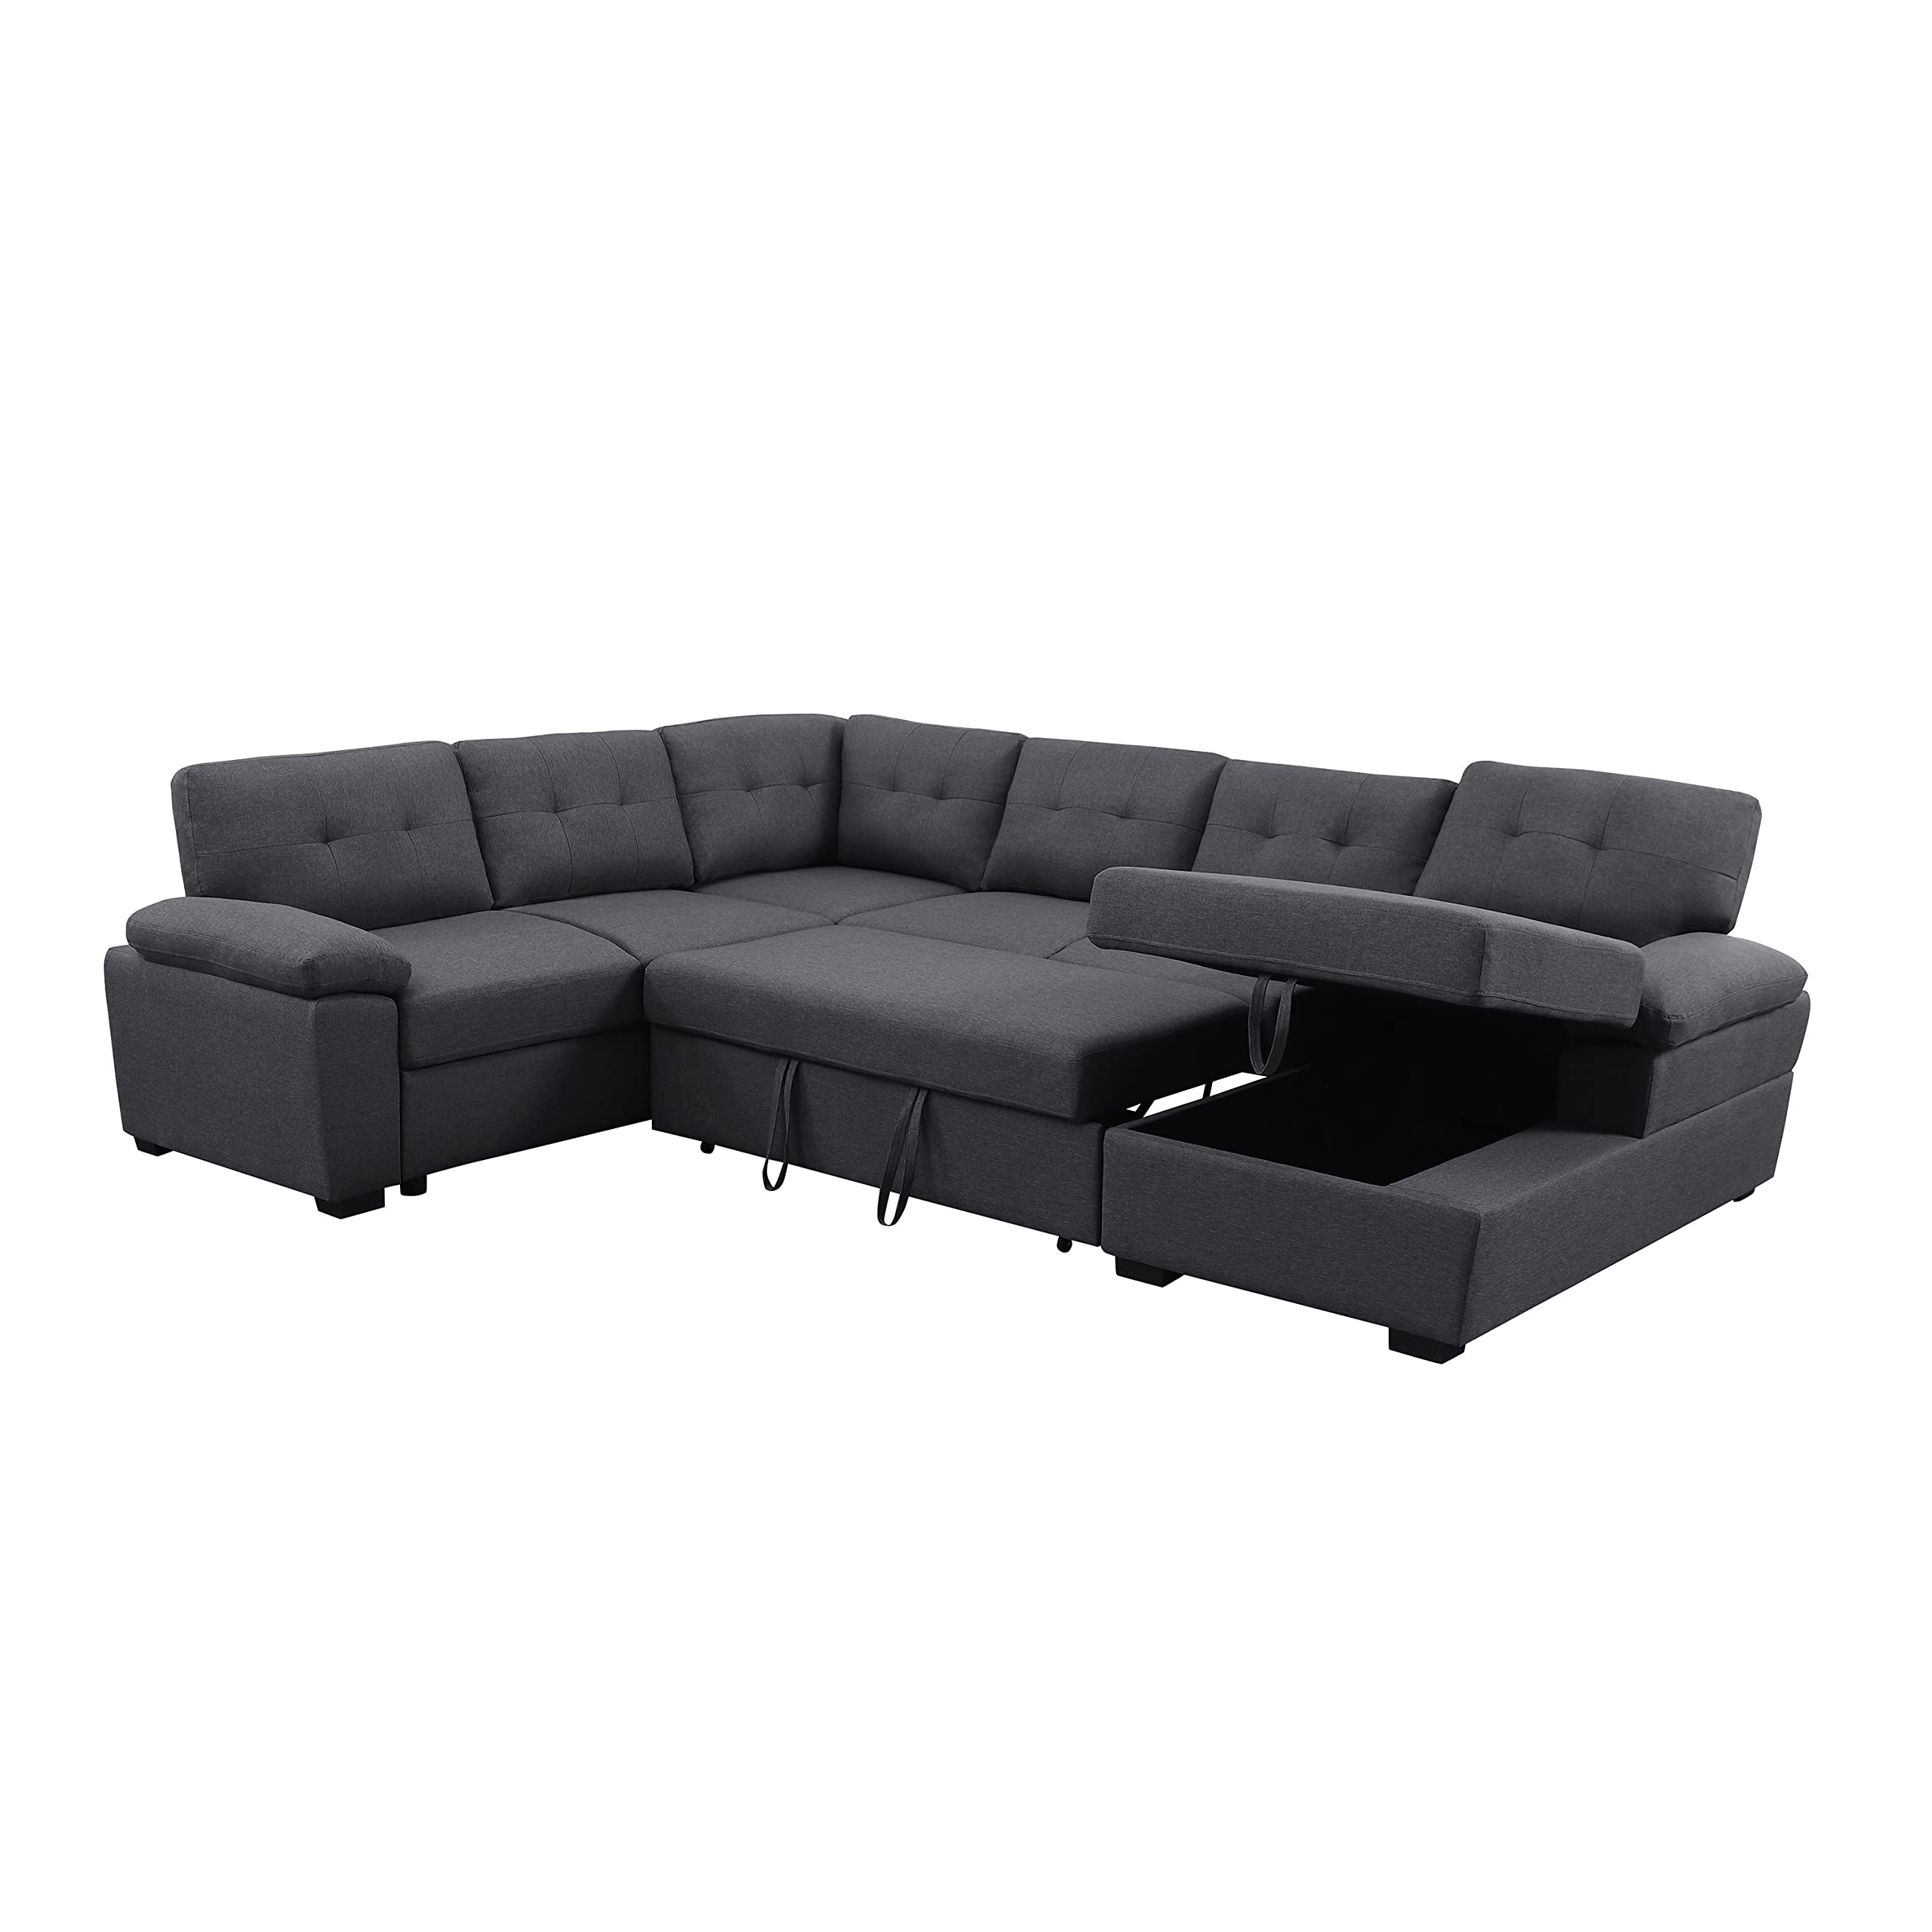 Alexent 5-Seat Modern Fabric Sleeper Sectional Sofa Bed with Pull-Out Bed with Storage chaise Lounge in Dark gray color for Spac